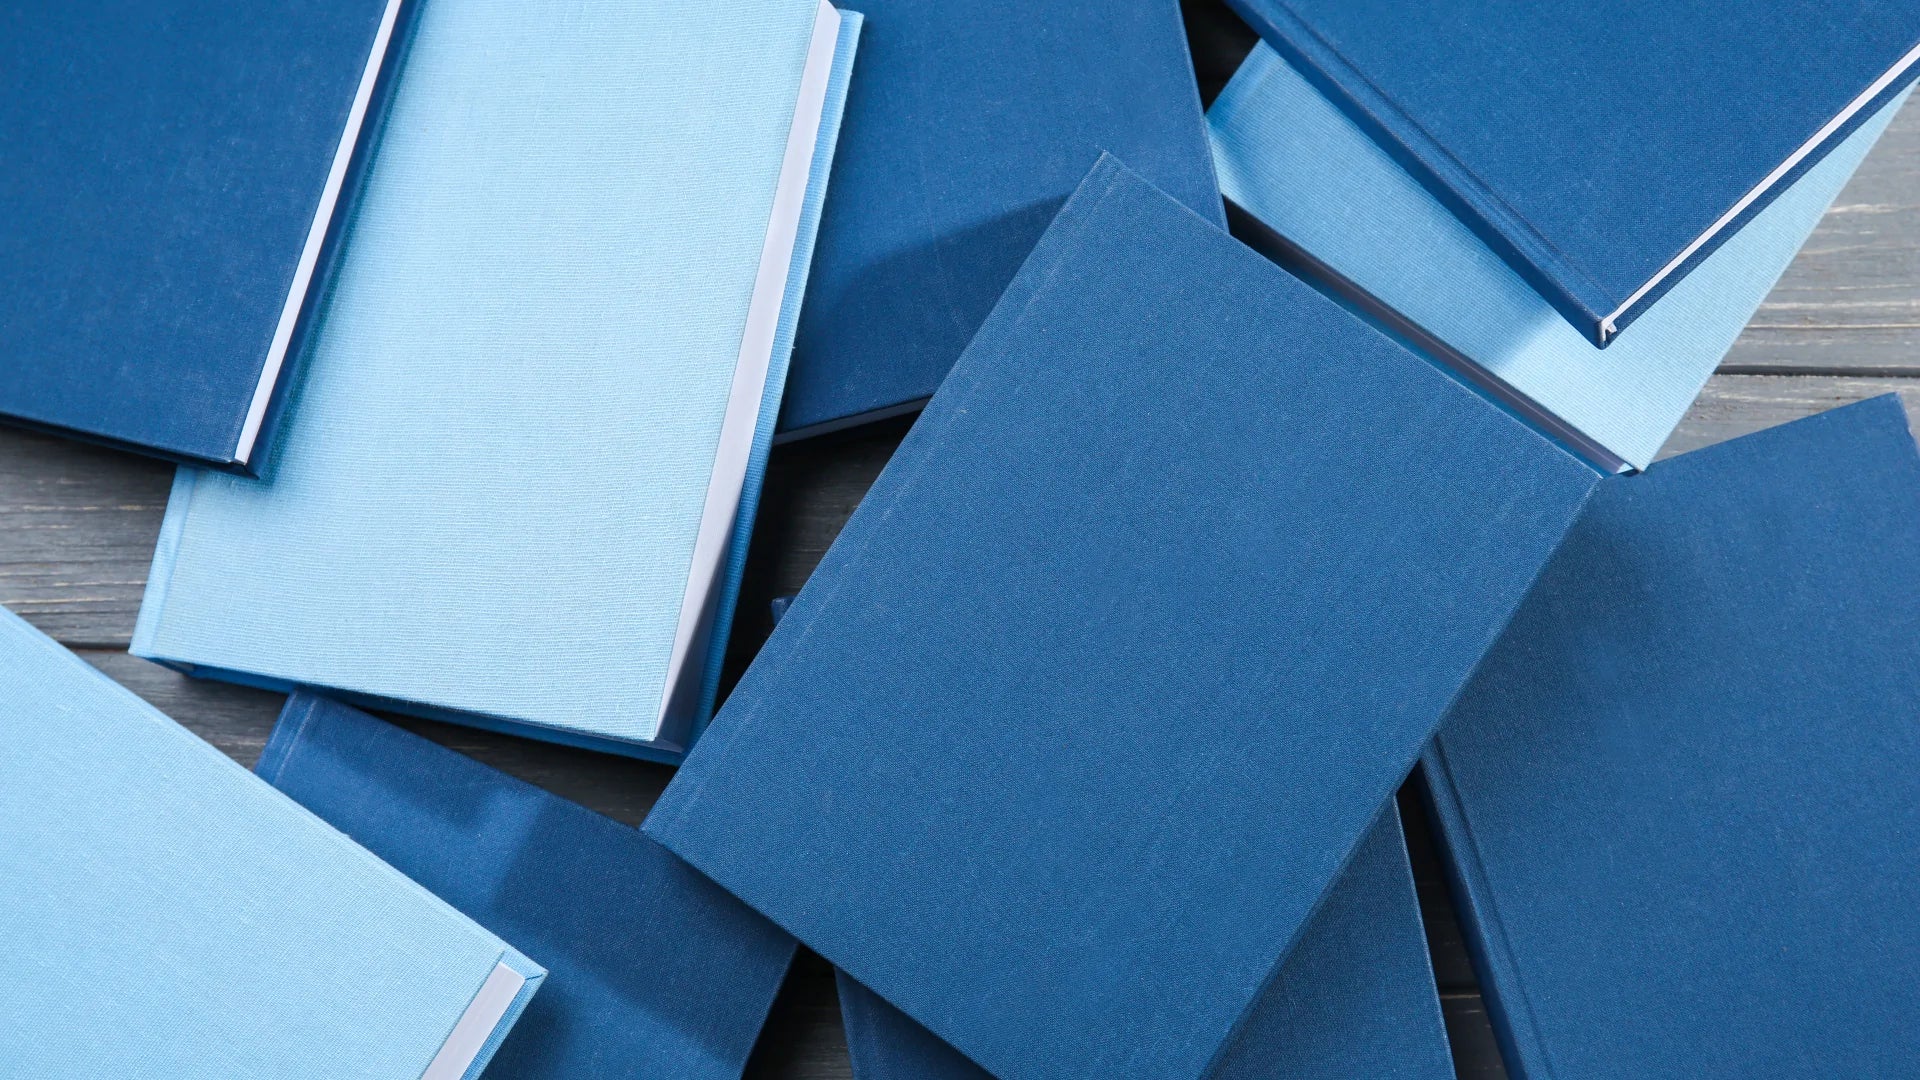 many different shades of blue log books